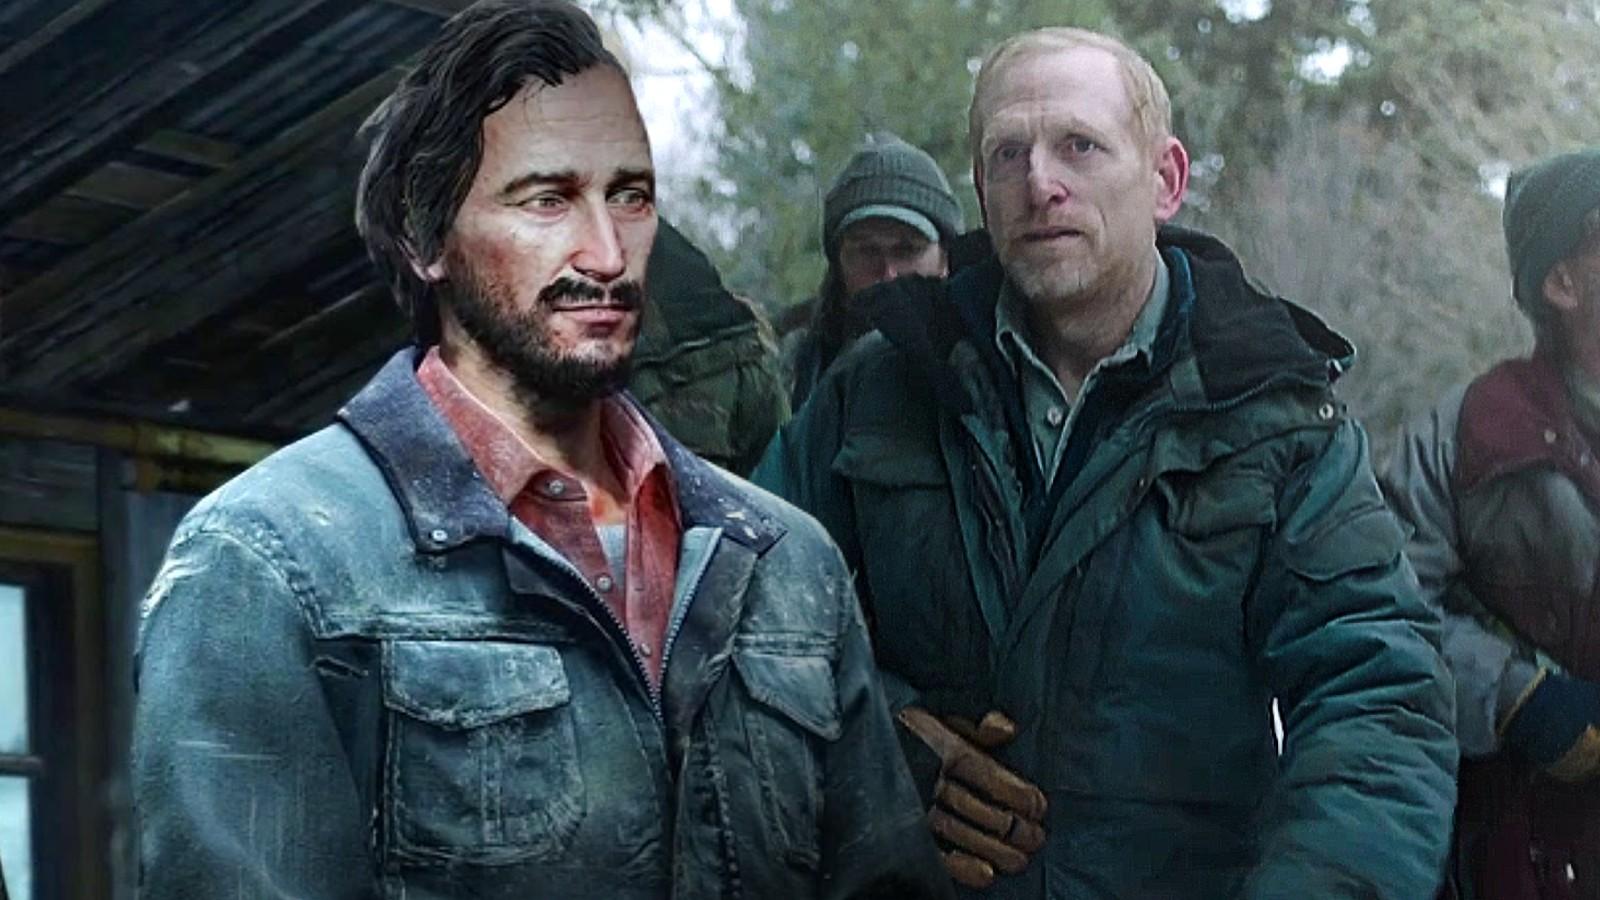 David in The Last of Us HBO show and game